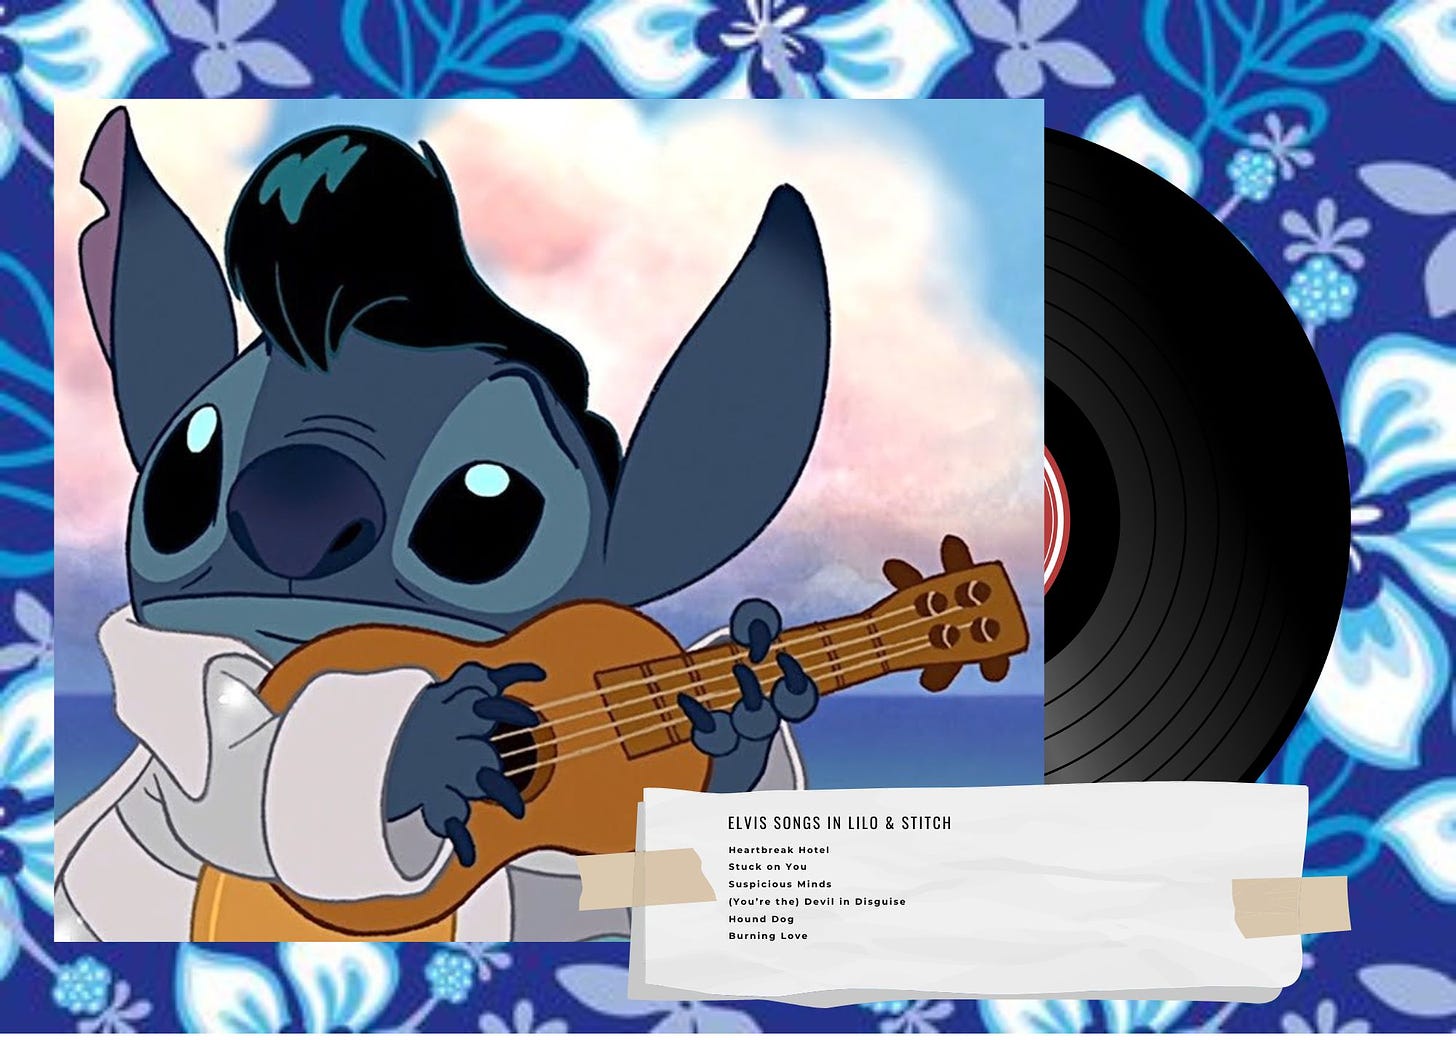 A photo of Stitch dressed as Elvis next to a list of Elvis songs that played in Lilo & Stitch.